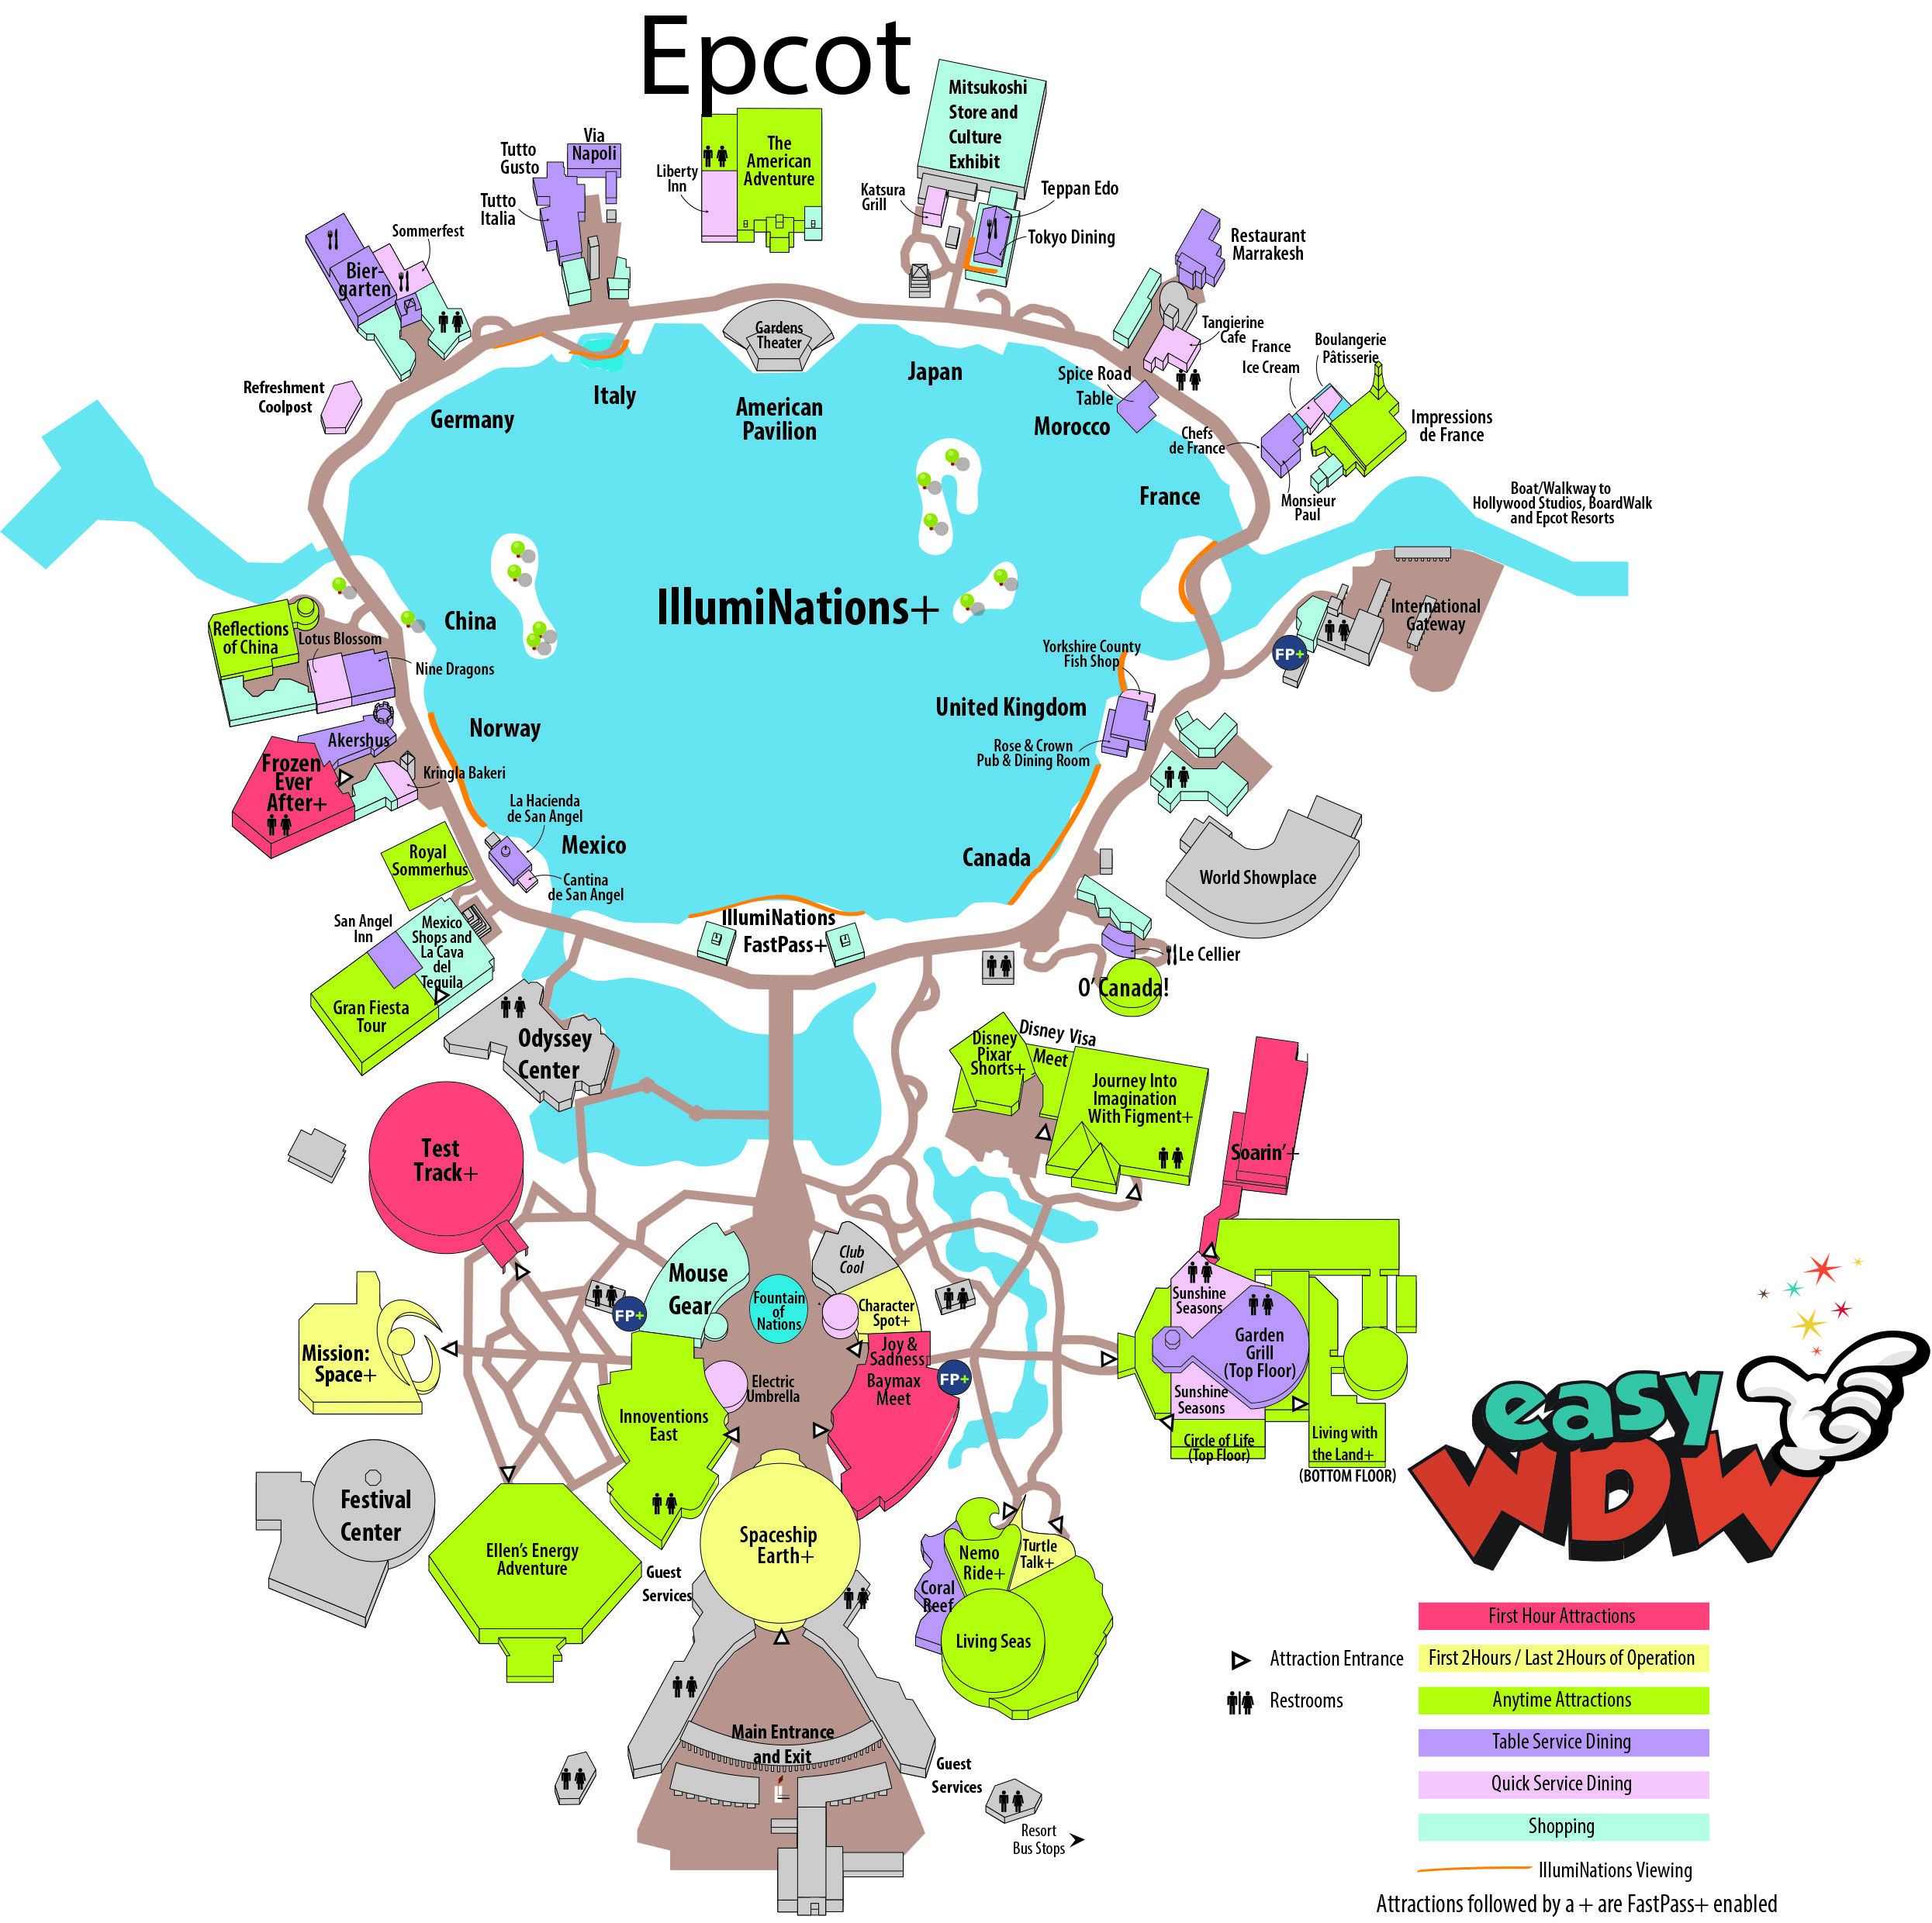 2017 Epcot Maps Printable | Easy Guide – Easywdw | I Wanna Go! In - Wdw Maps Printable